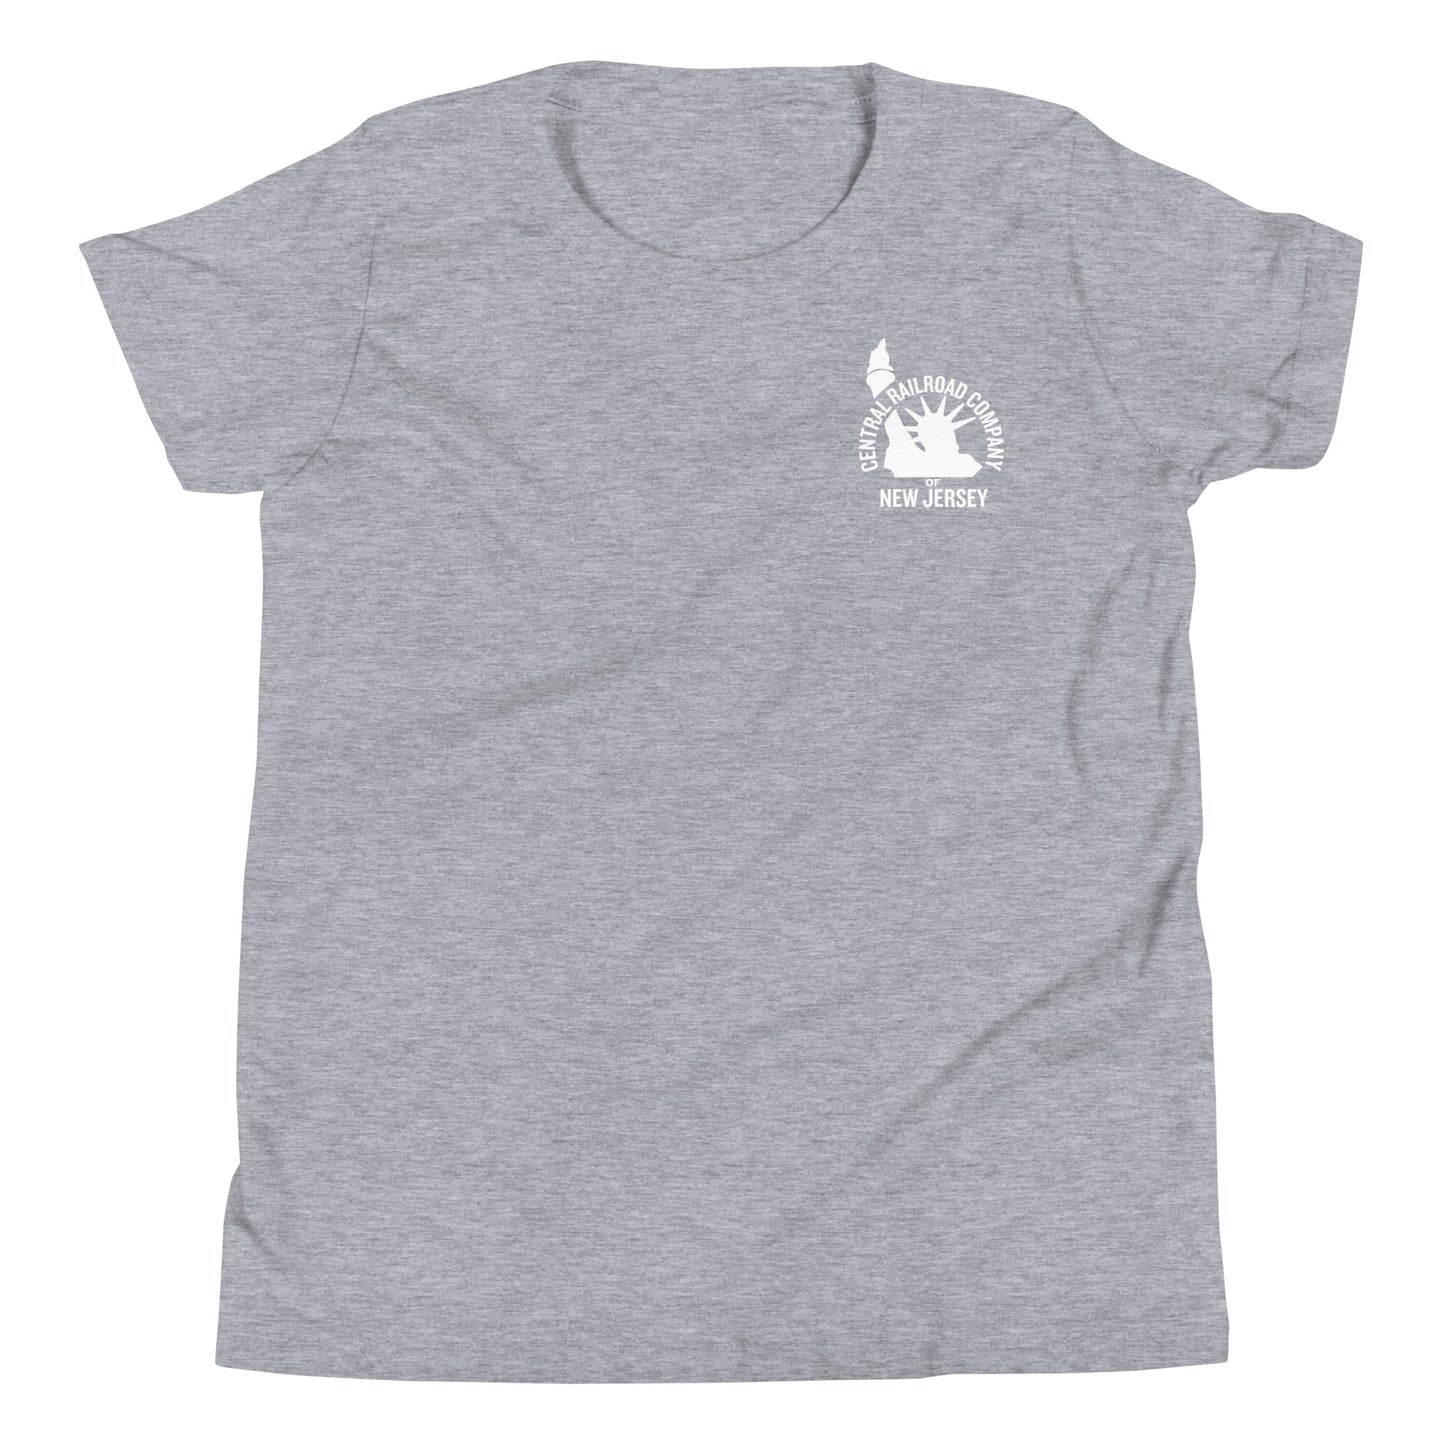 Kid's Central Railroad Company of New Jersey tee